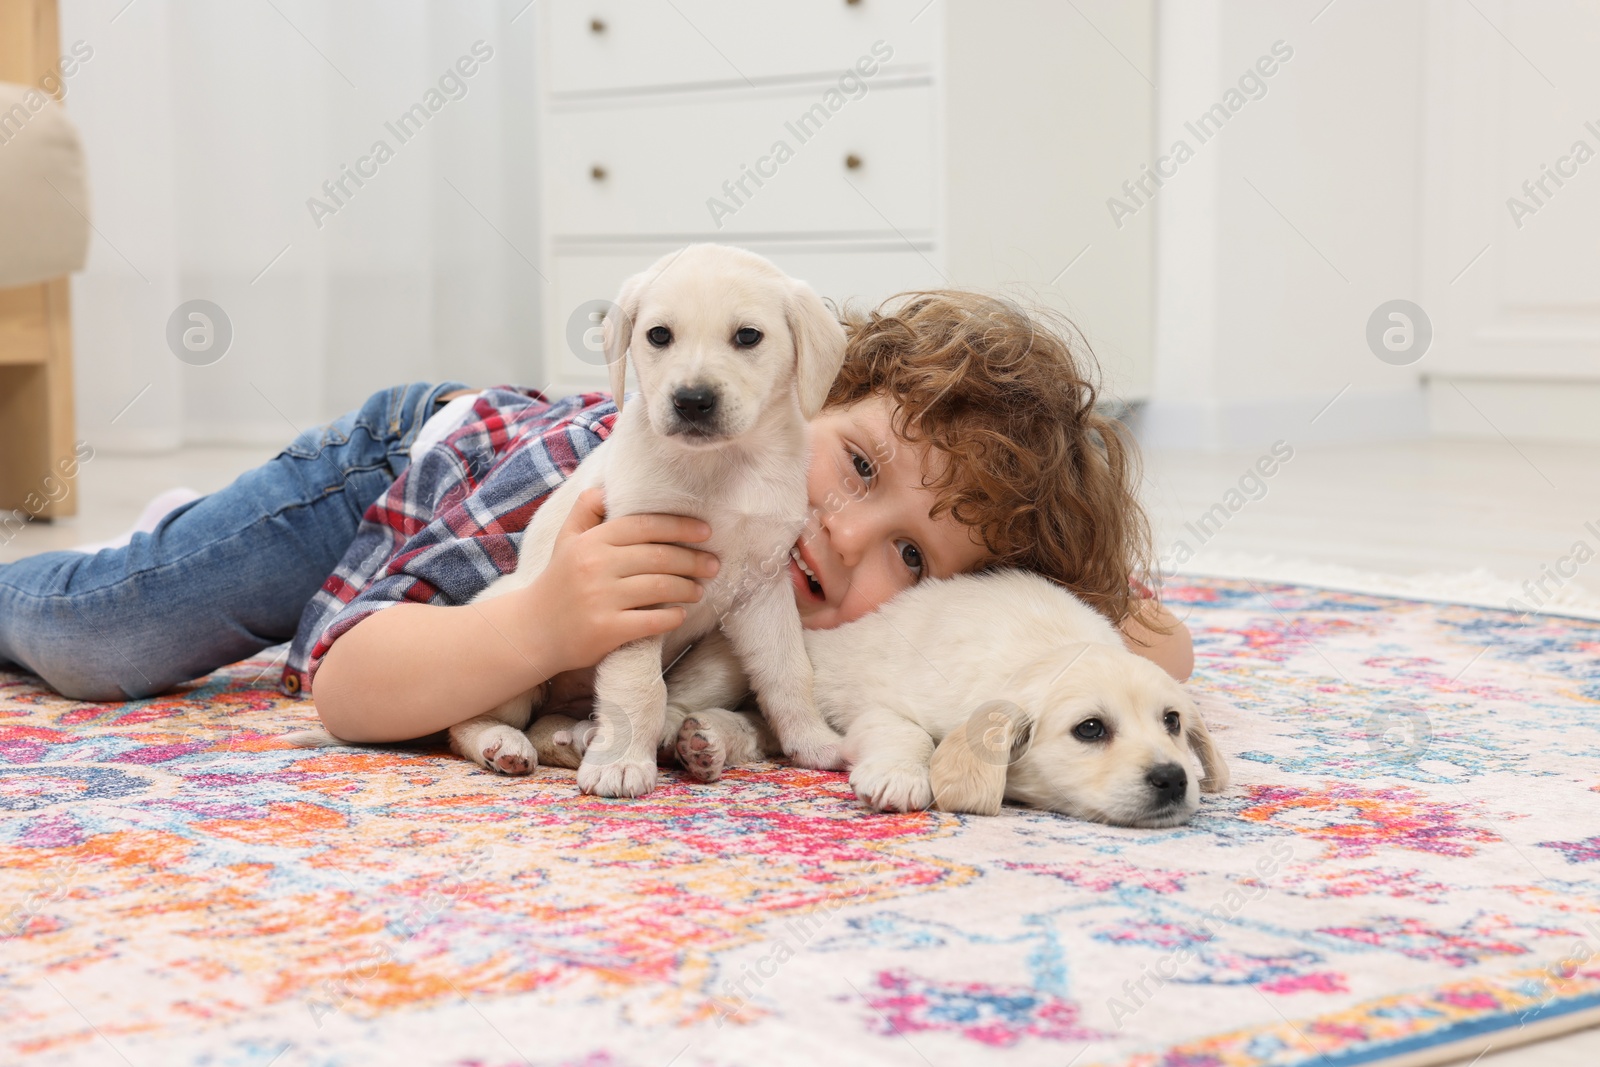 Photo of Little boy with cute puppies on carpet at home